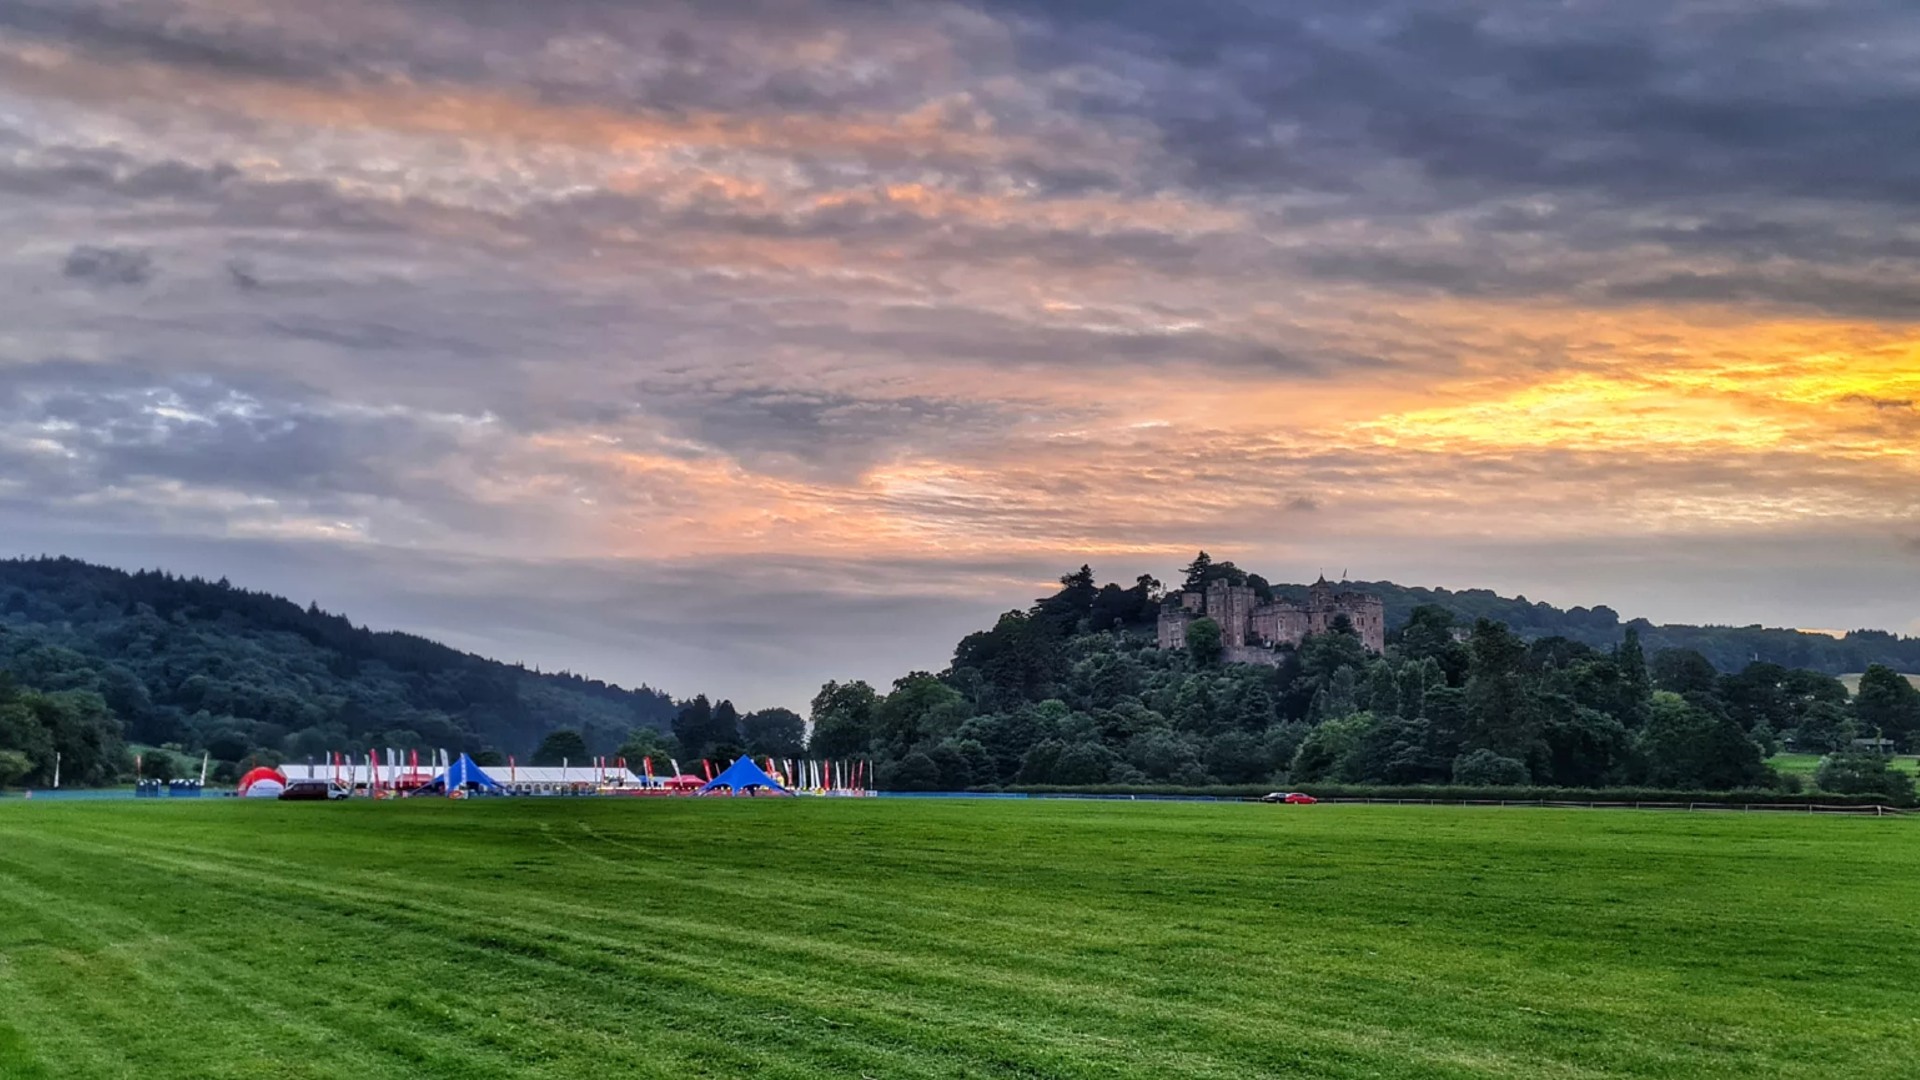 A stunning sunset behind a castle on a hill, and a running finishing line for an event